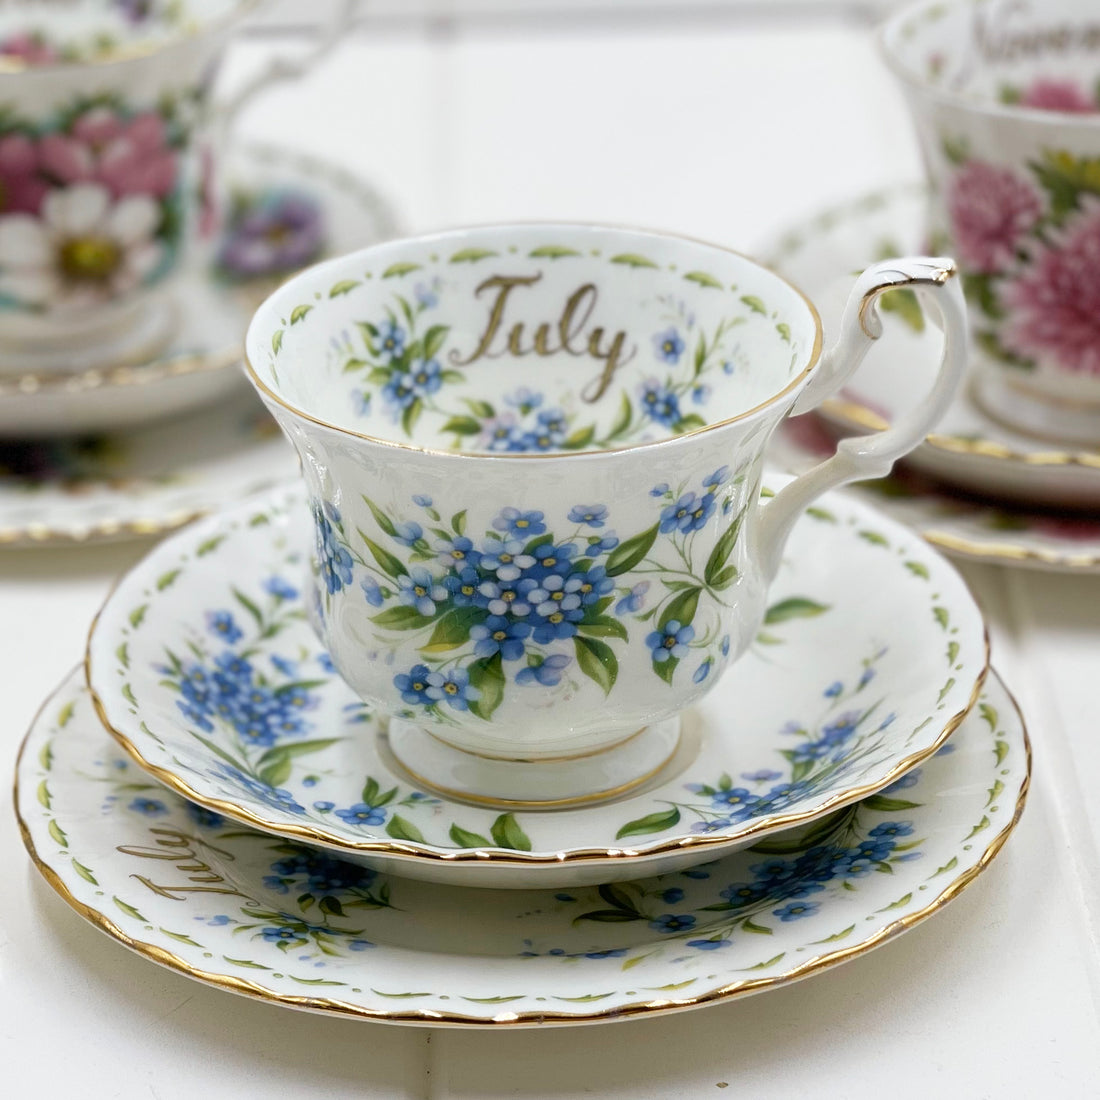 Royal Albert Vintage Flower of the Month July Forget-Me-Not Trio